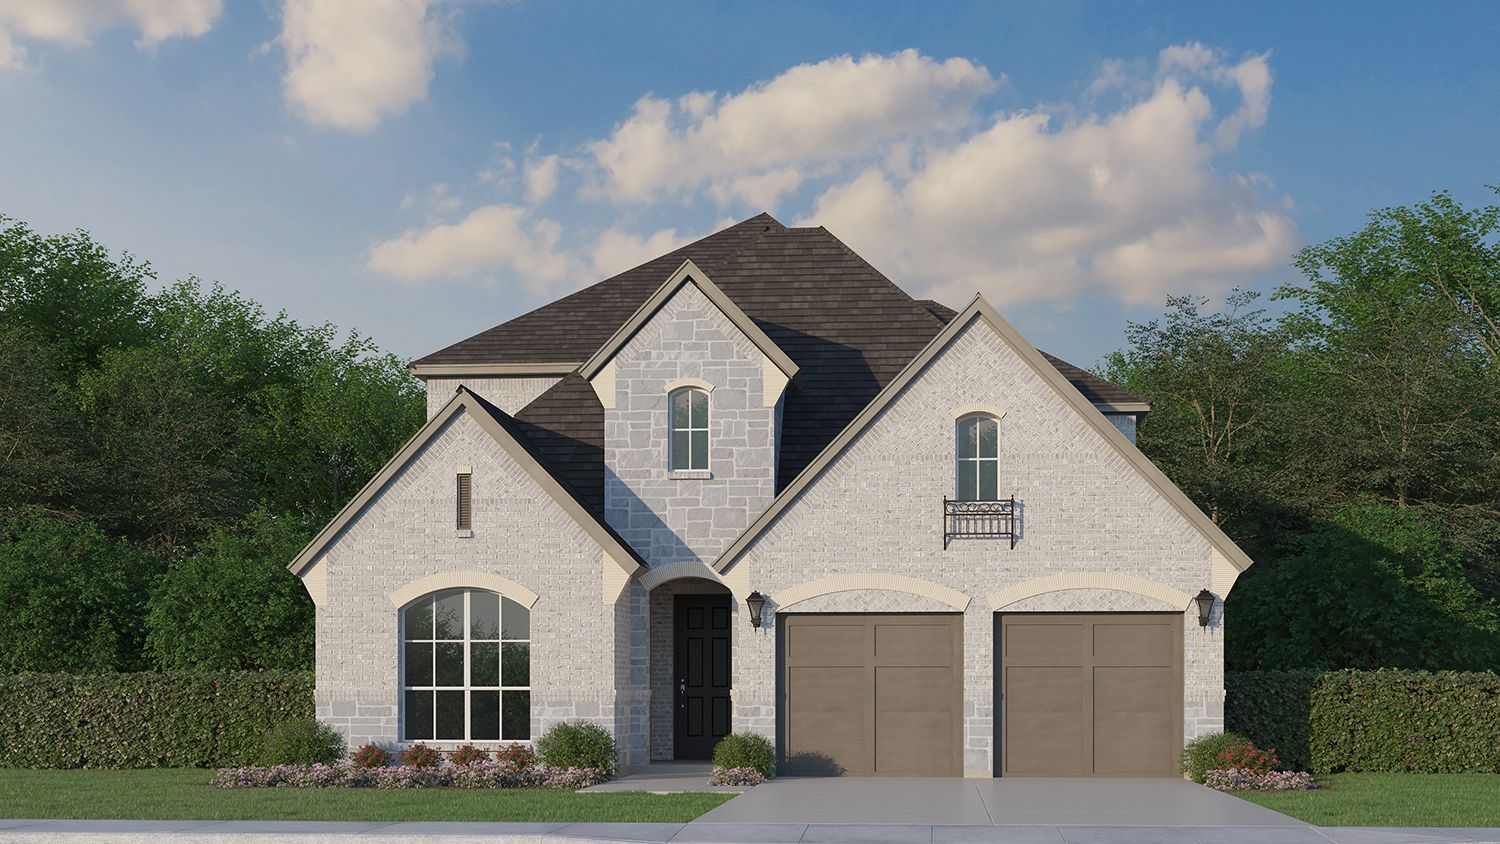 Exterior:Plan 1571 Elevation A with Stone